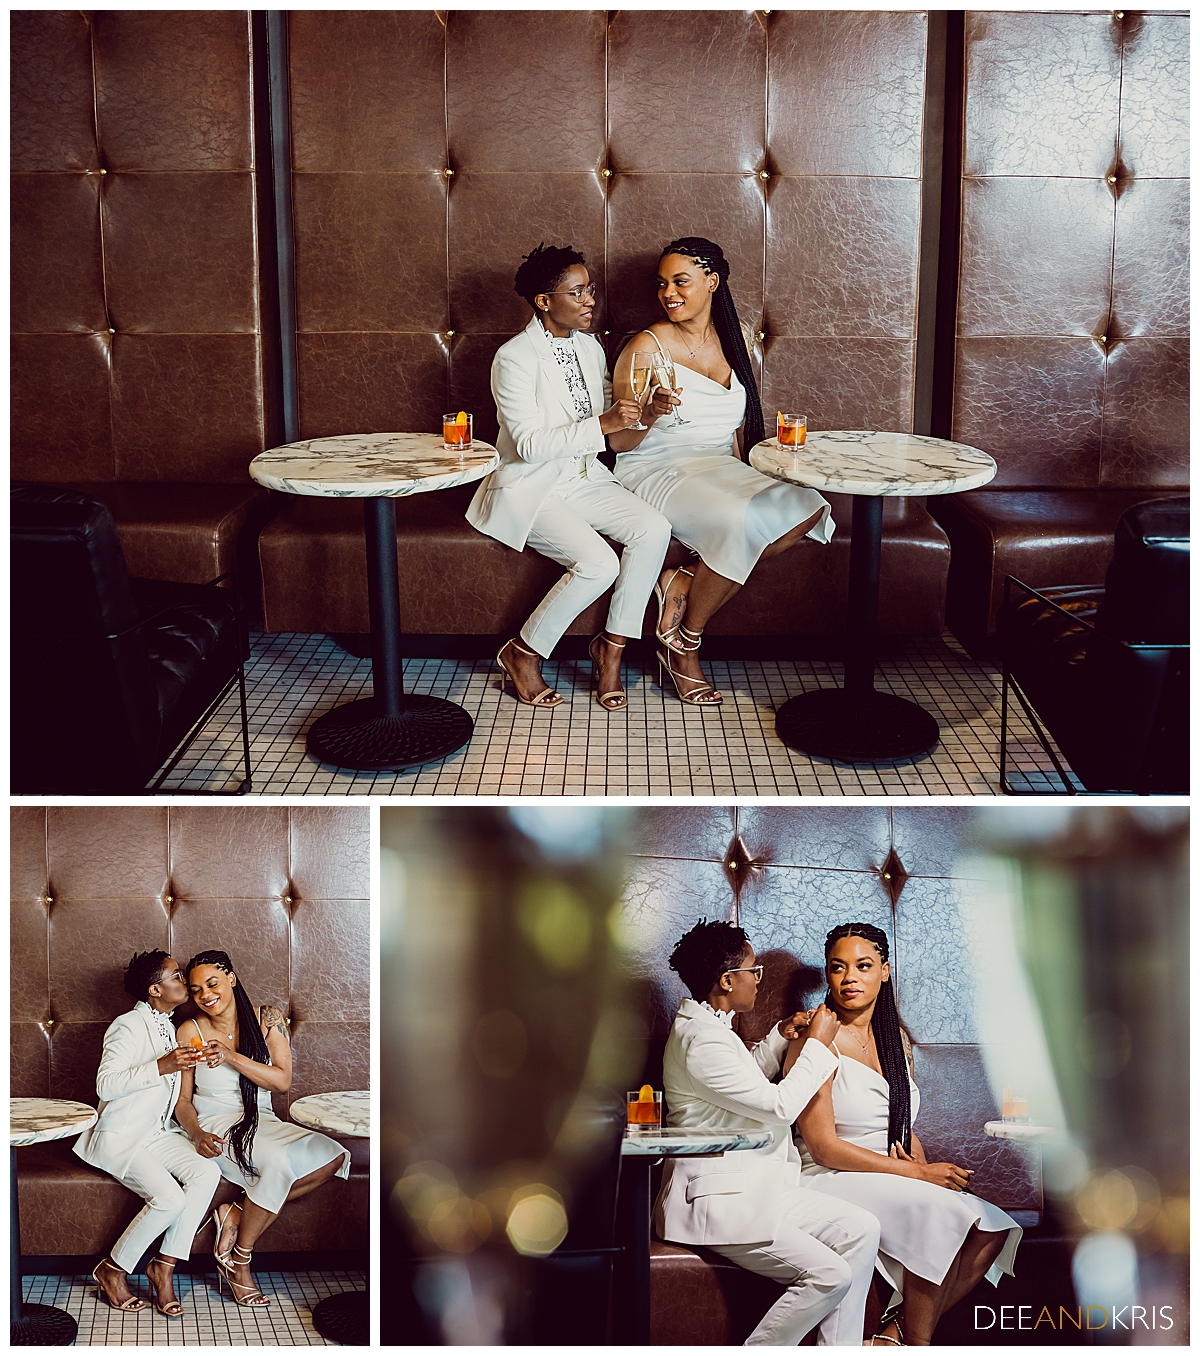 Three images: Top image of couple sitting on leather tufted seating toasting with champagne. Bottom left image of first bride kissing second bride on temple while seated  on tufted leather seat. Bottom right image POV through champagne glasses view of couple together.